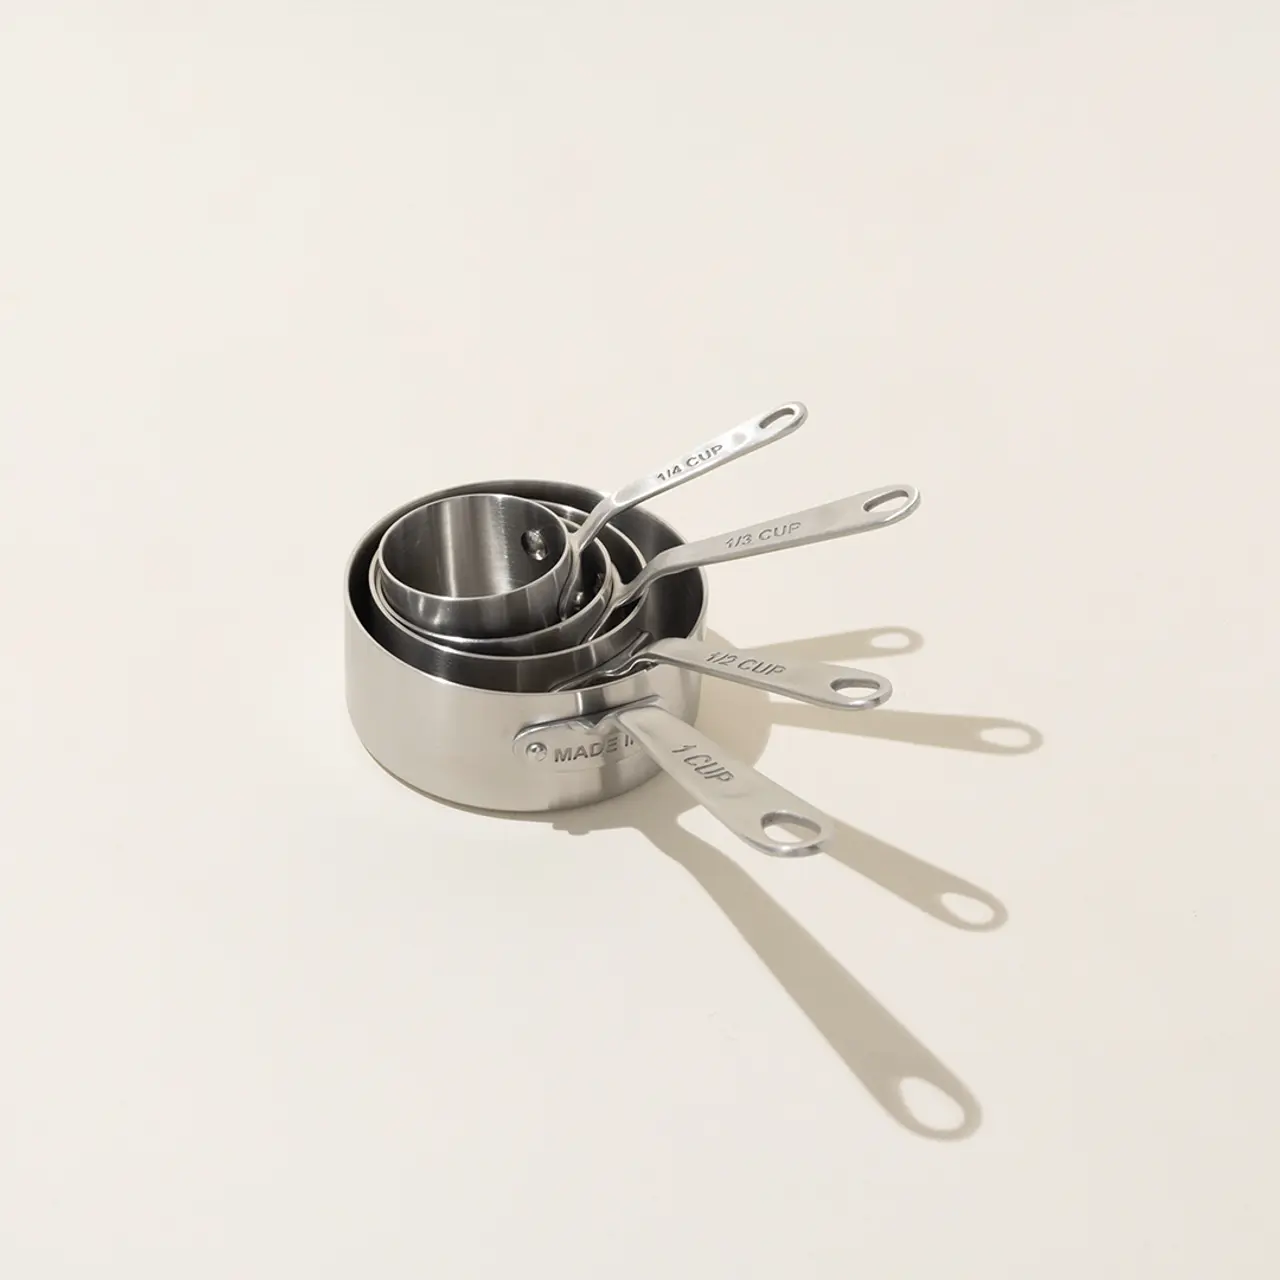 A set of metal measuring cups with handles is neatly stacked on a light surface.